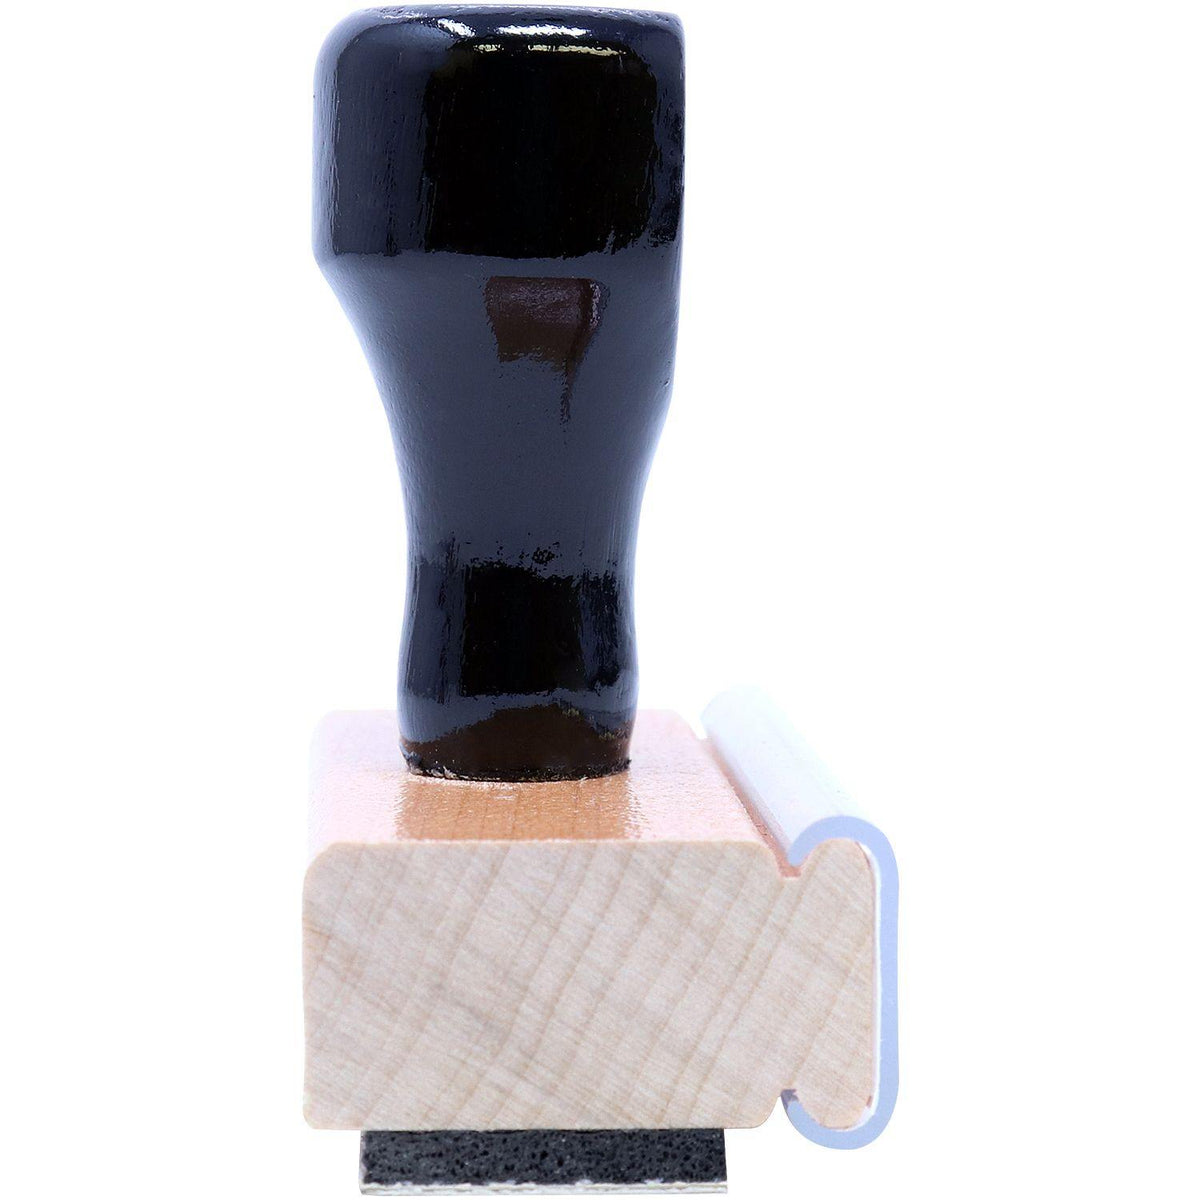 Side View of Large Letter Post Economy Rubber Stamp